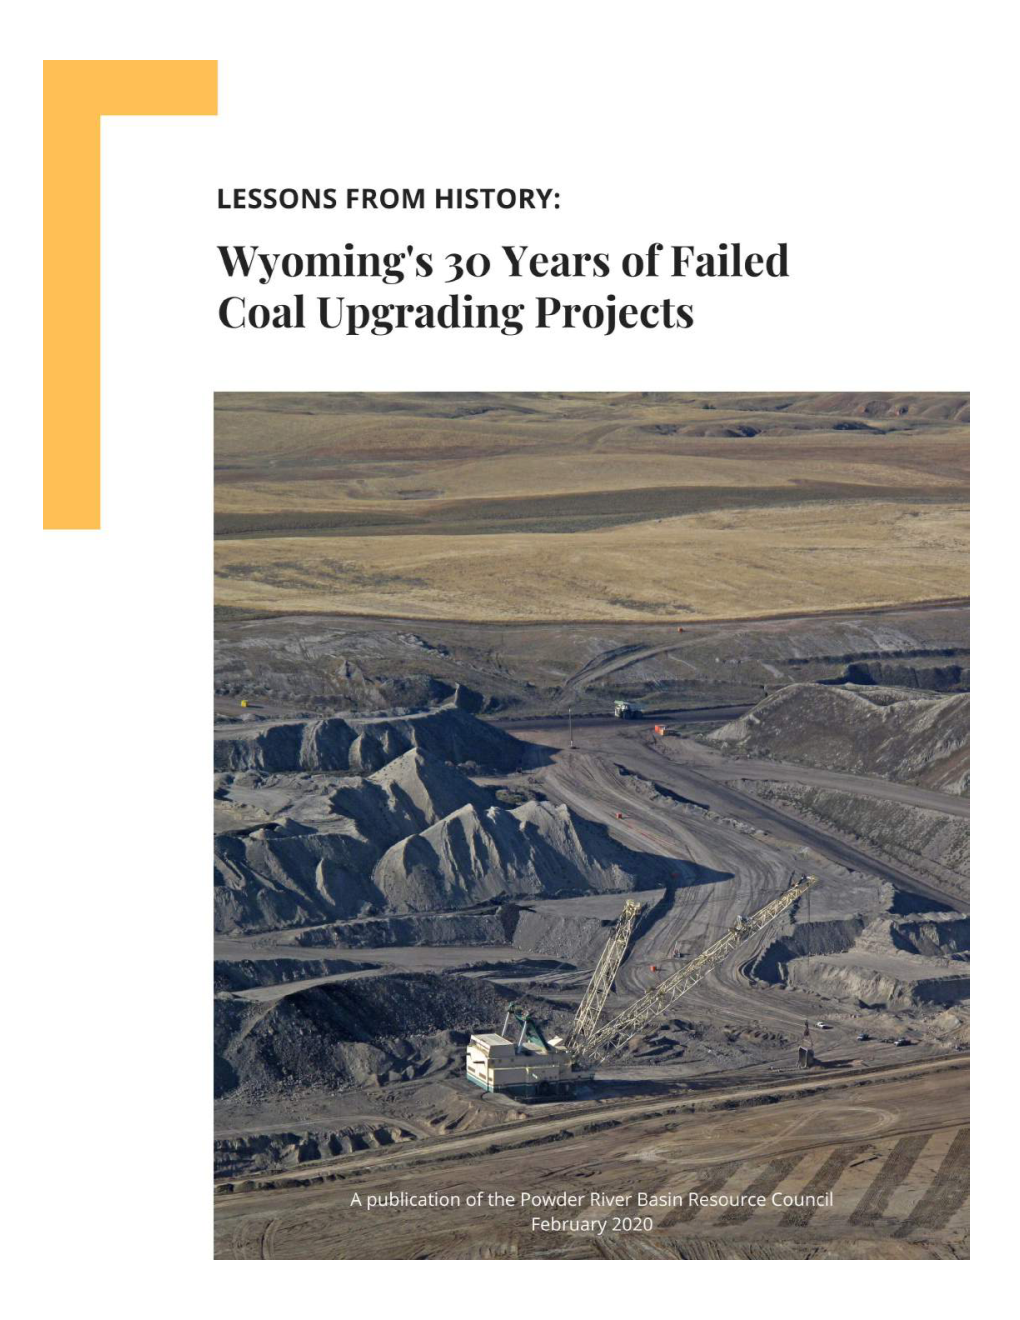 Failed-Coal-Projects-2020-Final-Small